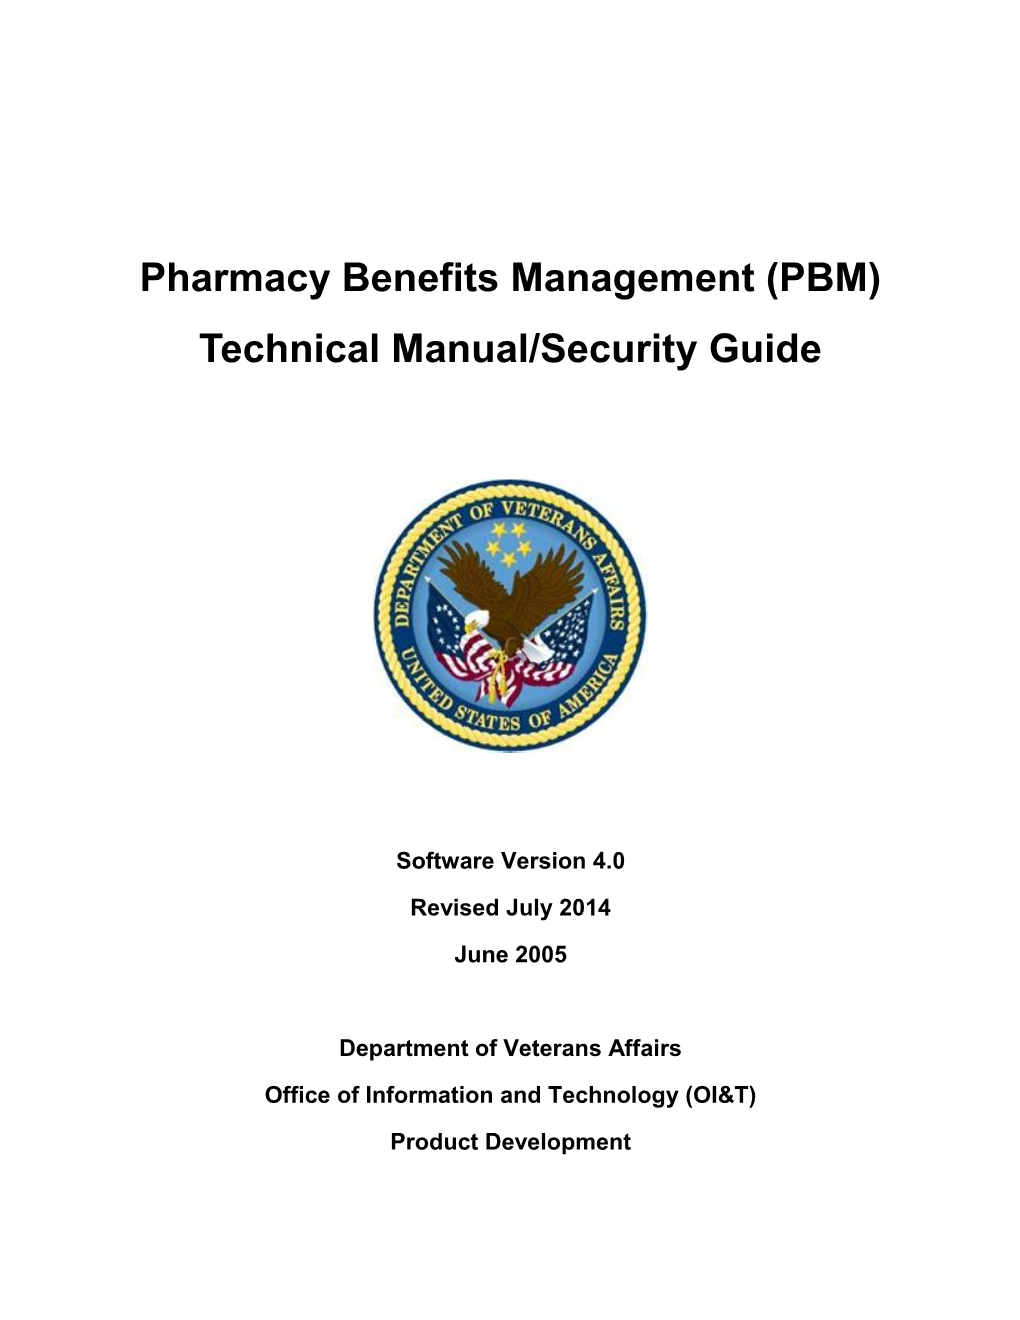 Pharmacy Benefits Management Technical Manual and Security Guide